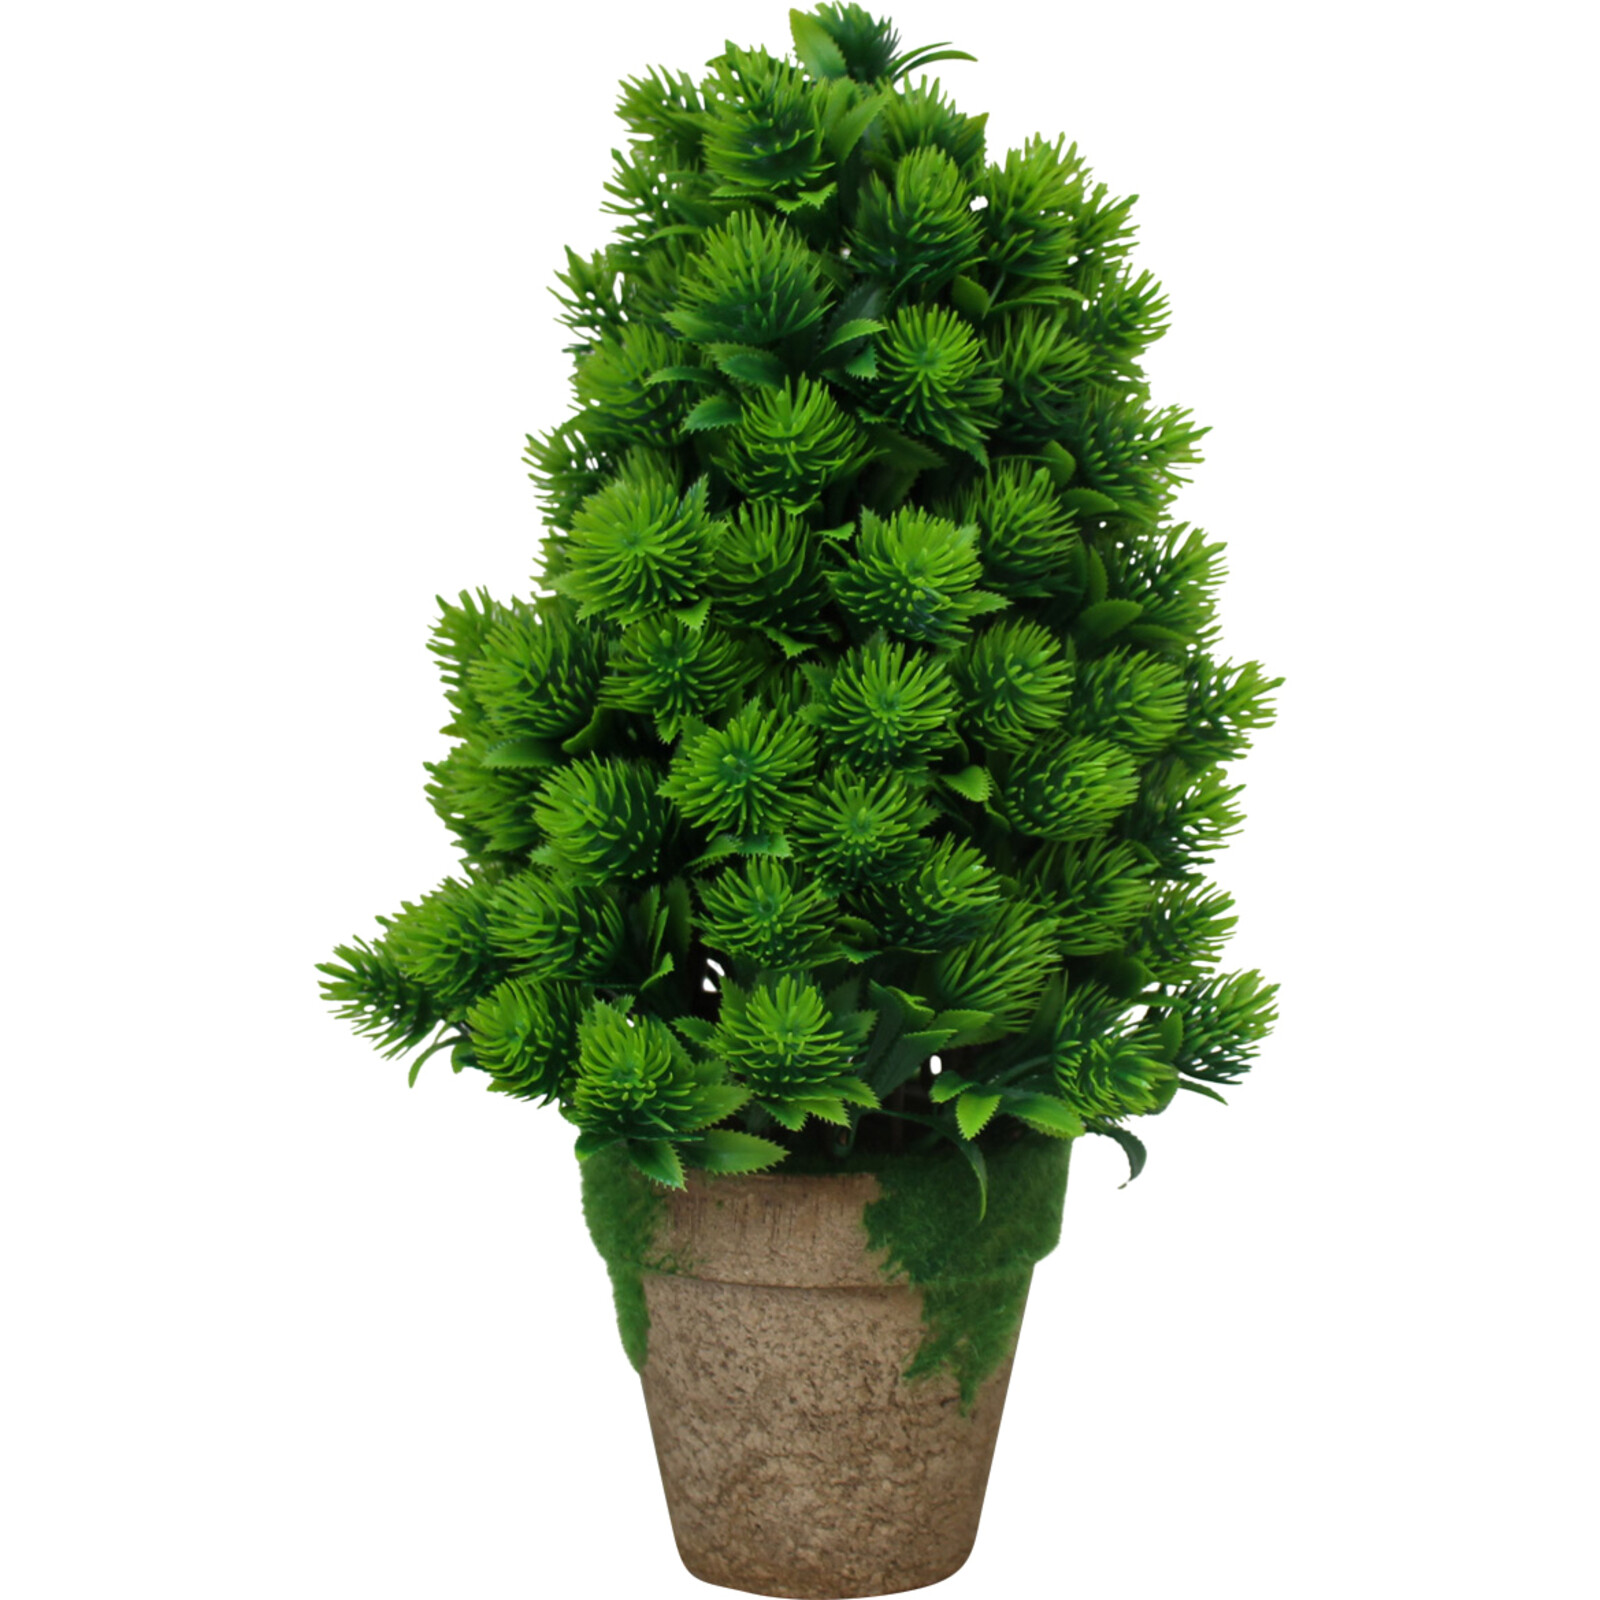 Pine Tree Potted